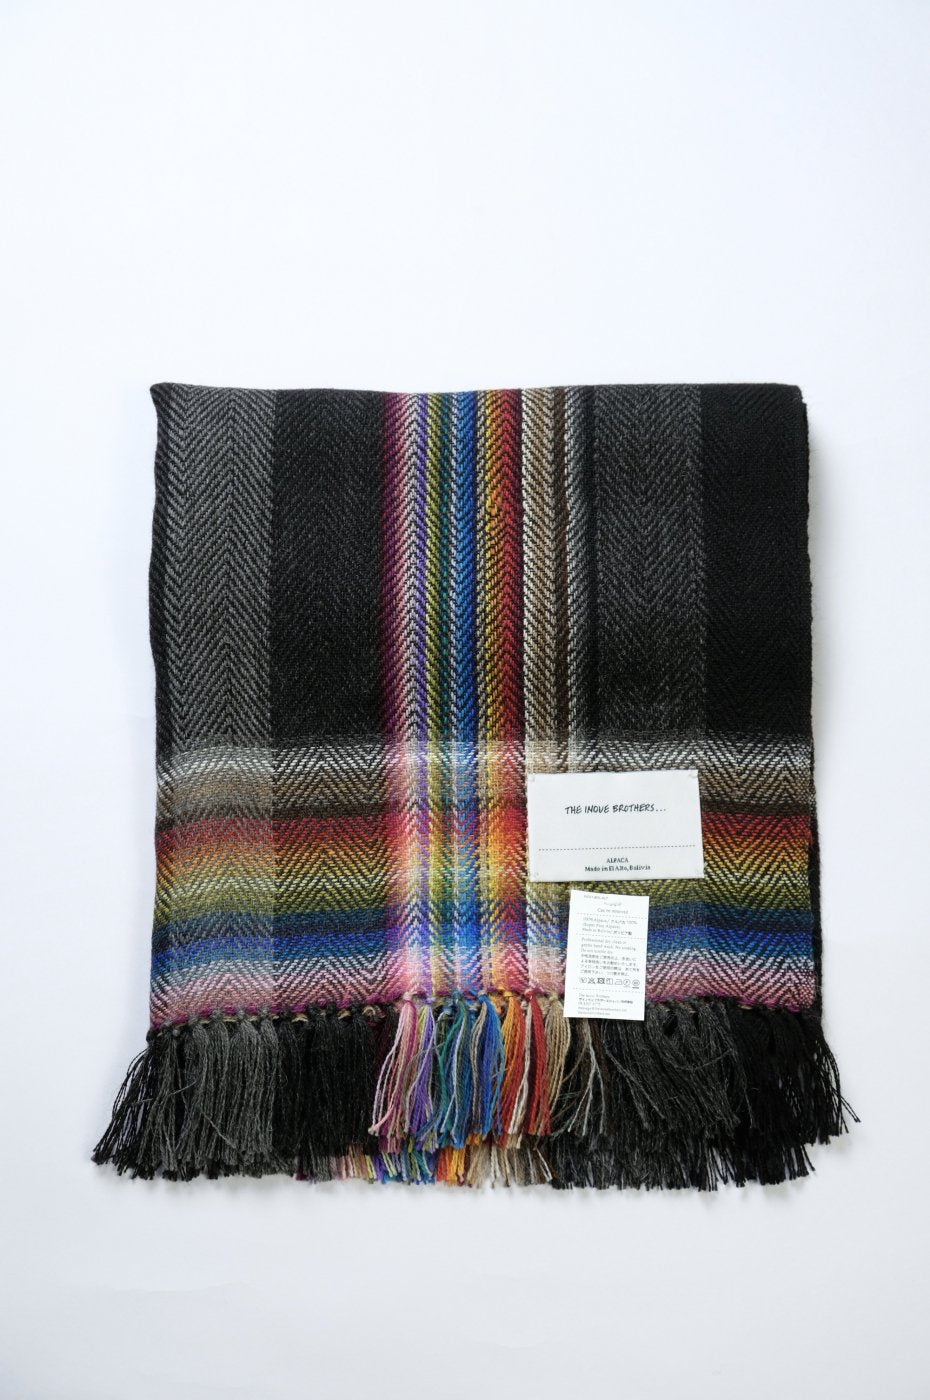 THE INOUE BROTHERS... "Multi Coloured Scarf / BLACK"